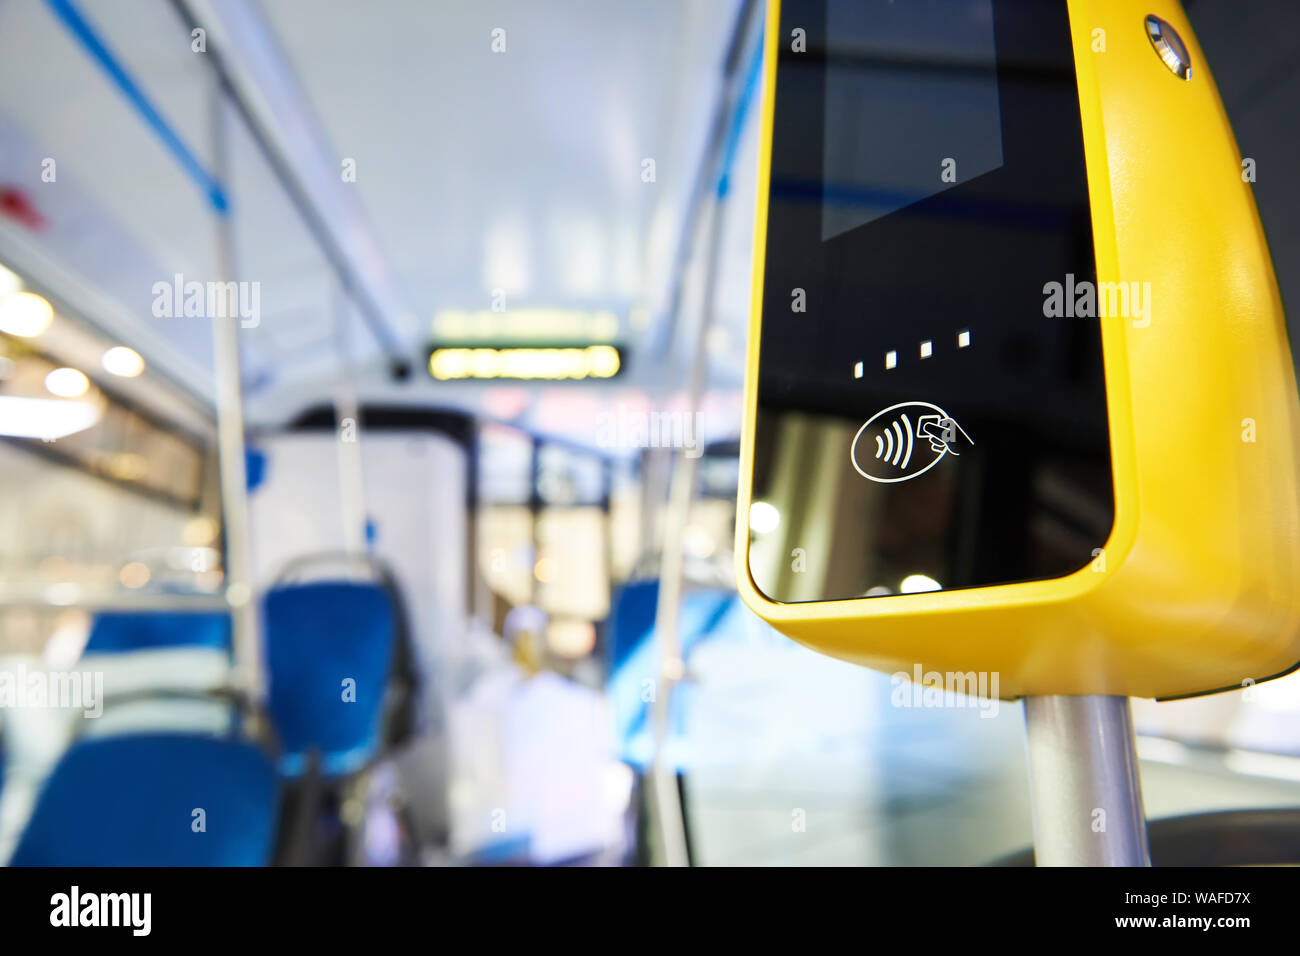 Modern touch payment terminal in bus Stock Photo